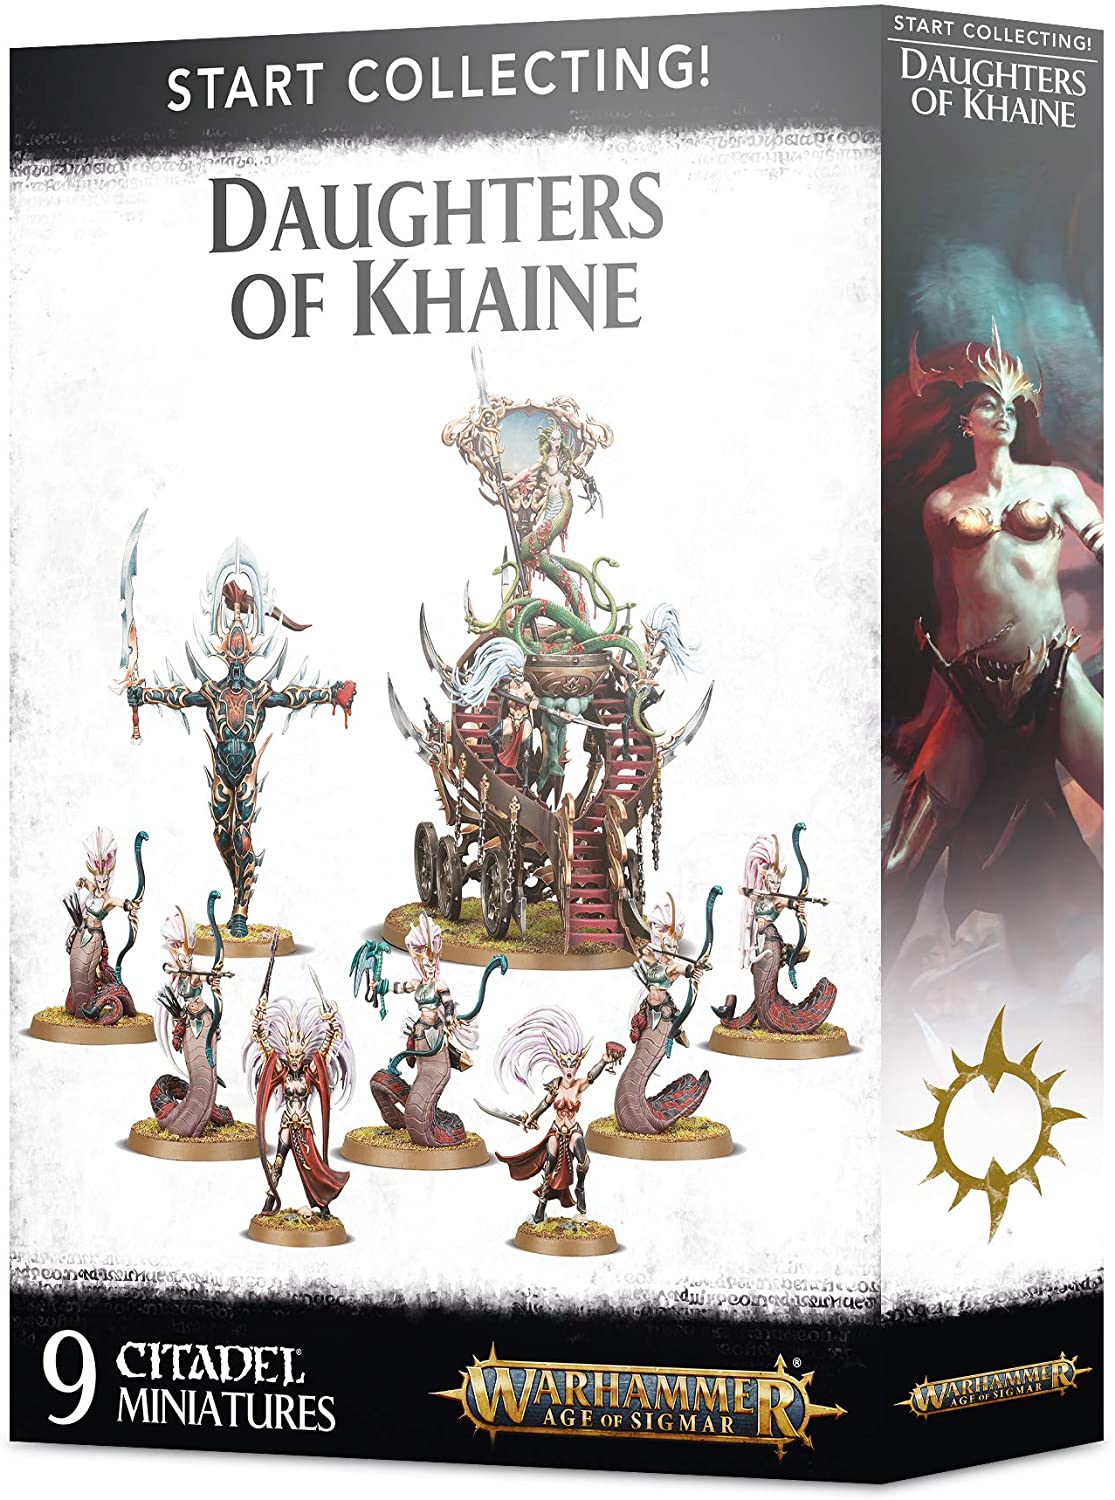 Start Collecting! - Daughters of Khaine